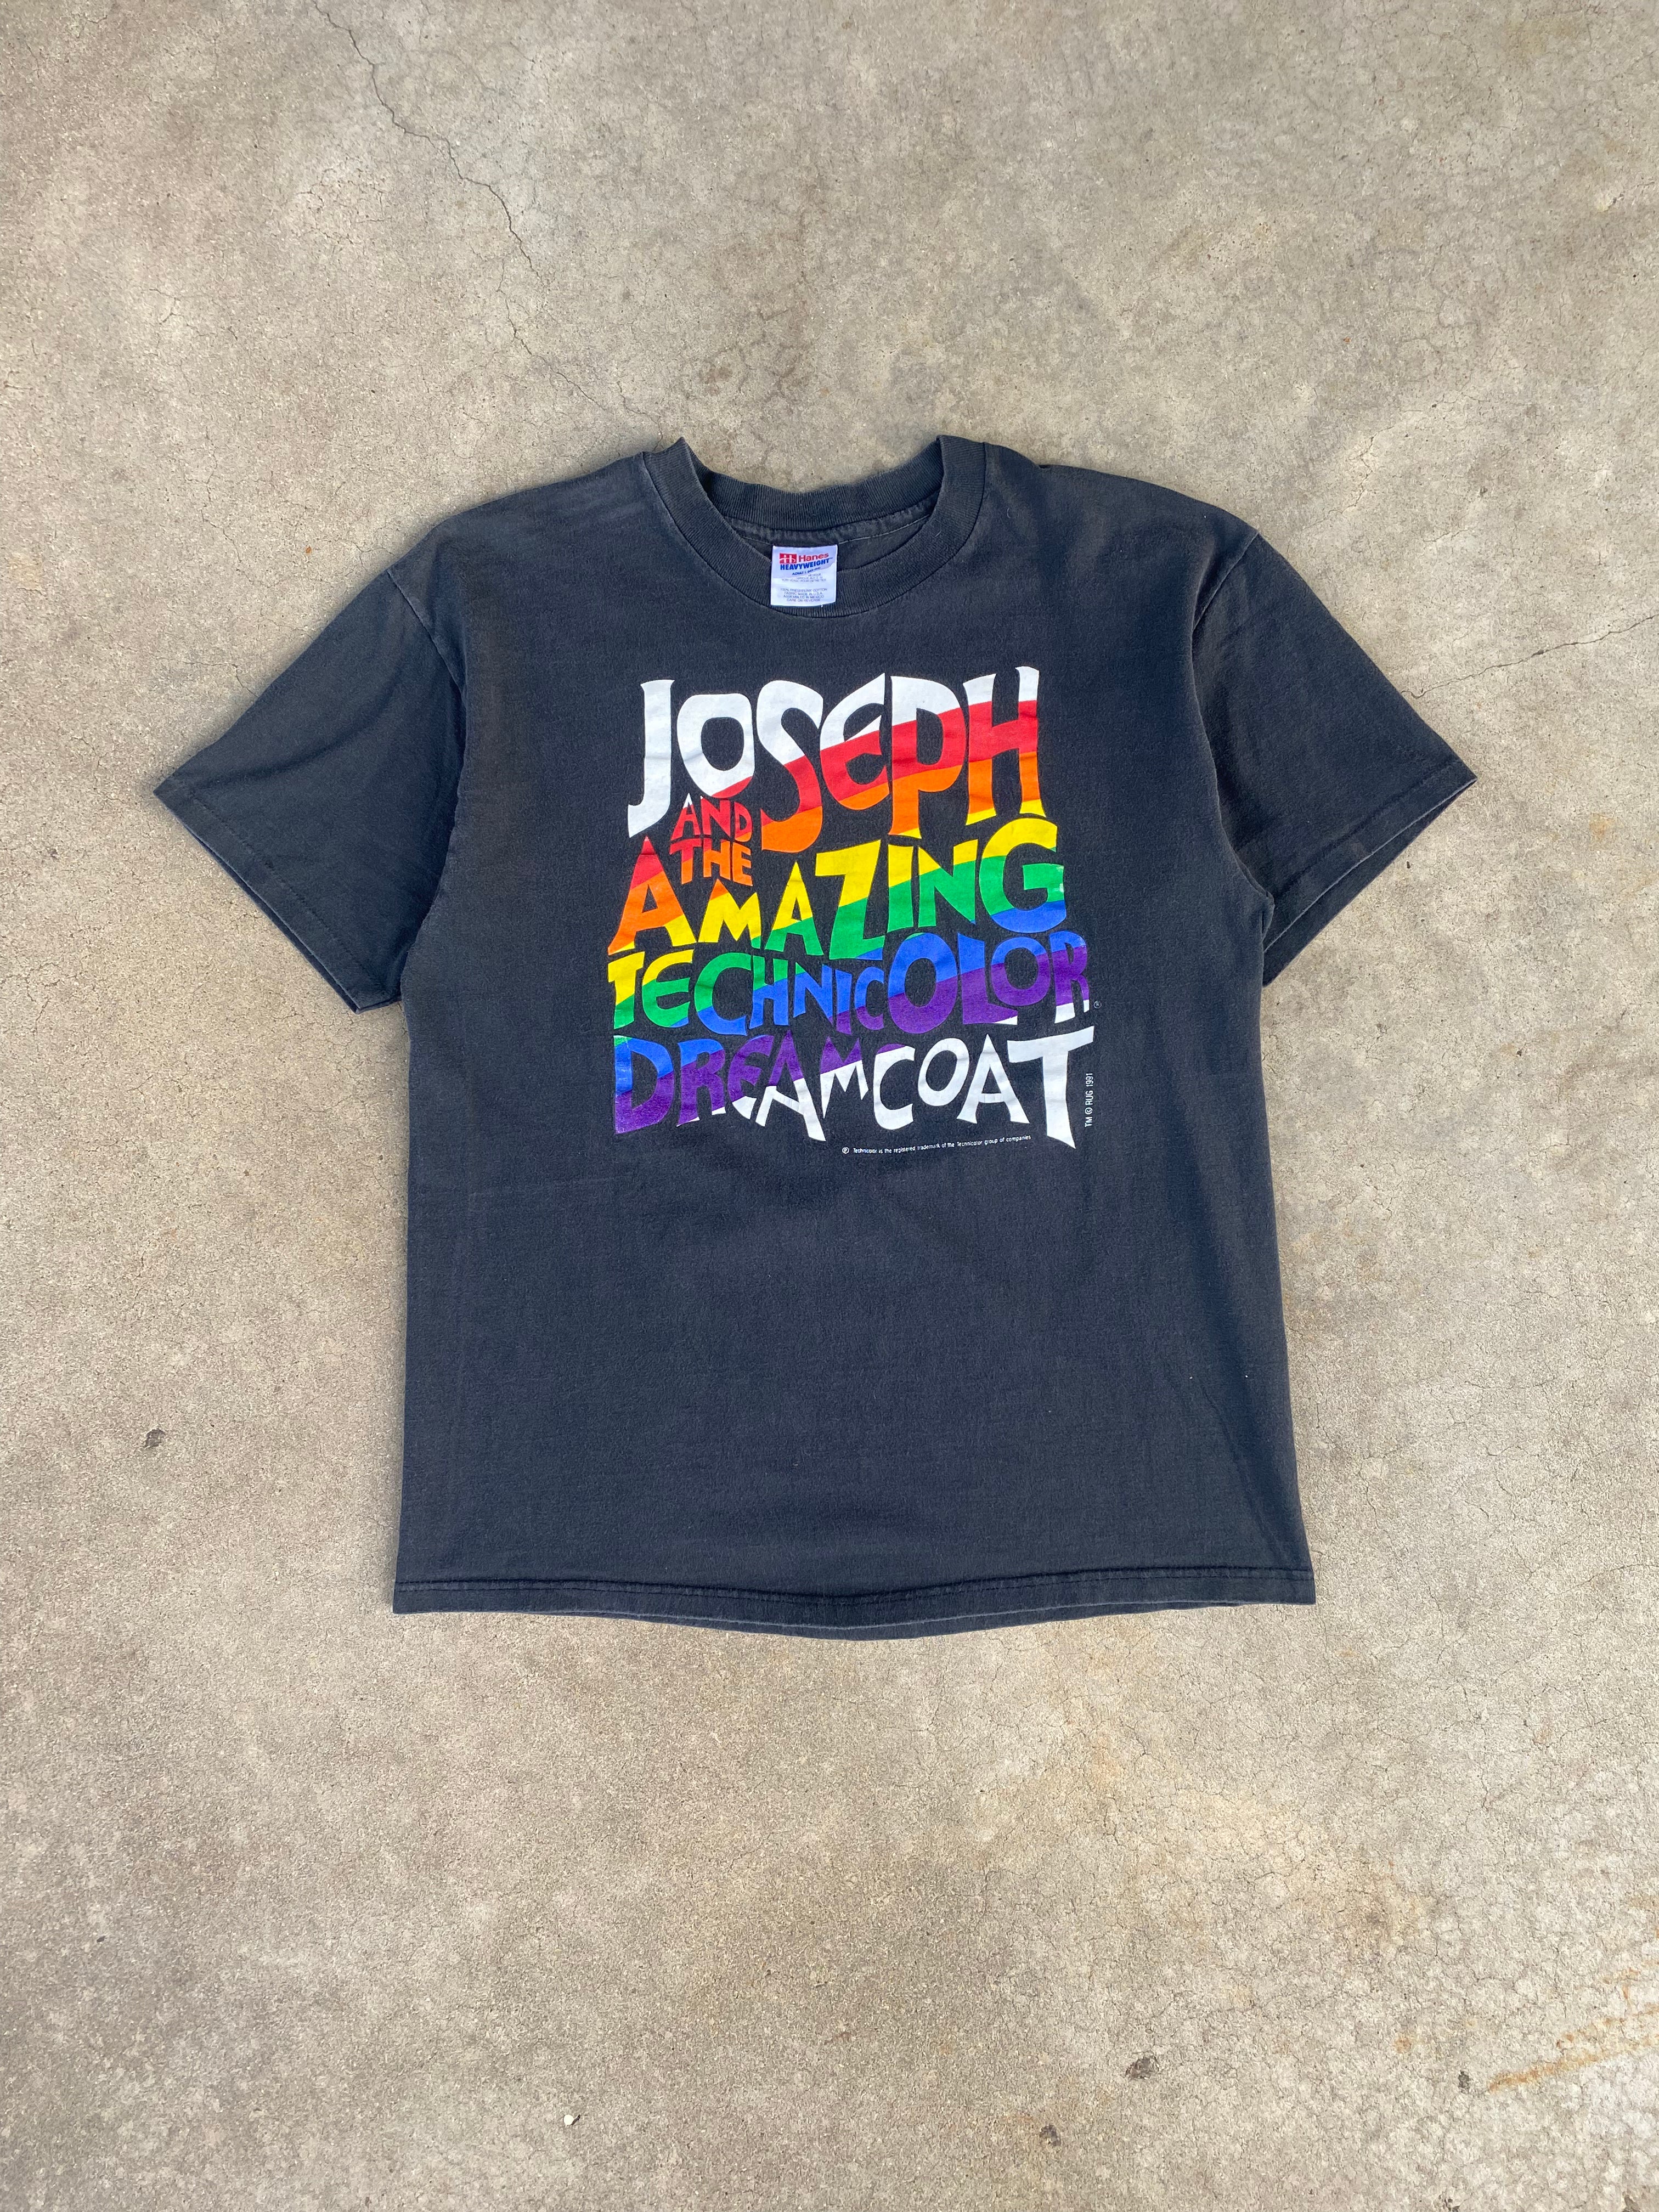 1991 Joseph and the Amazing Dreamcoat T-Shirt (L)